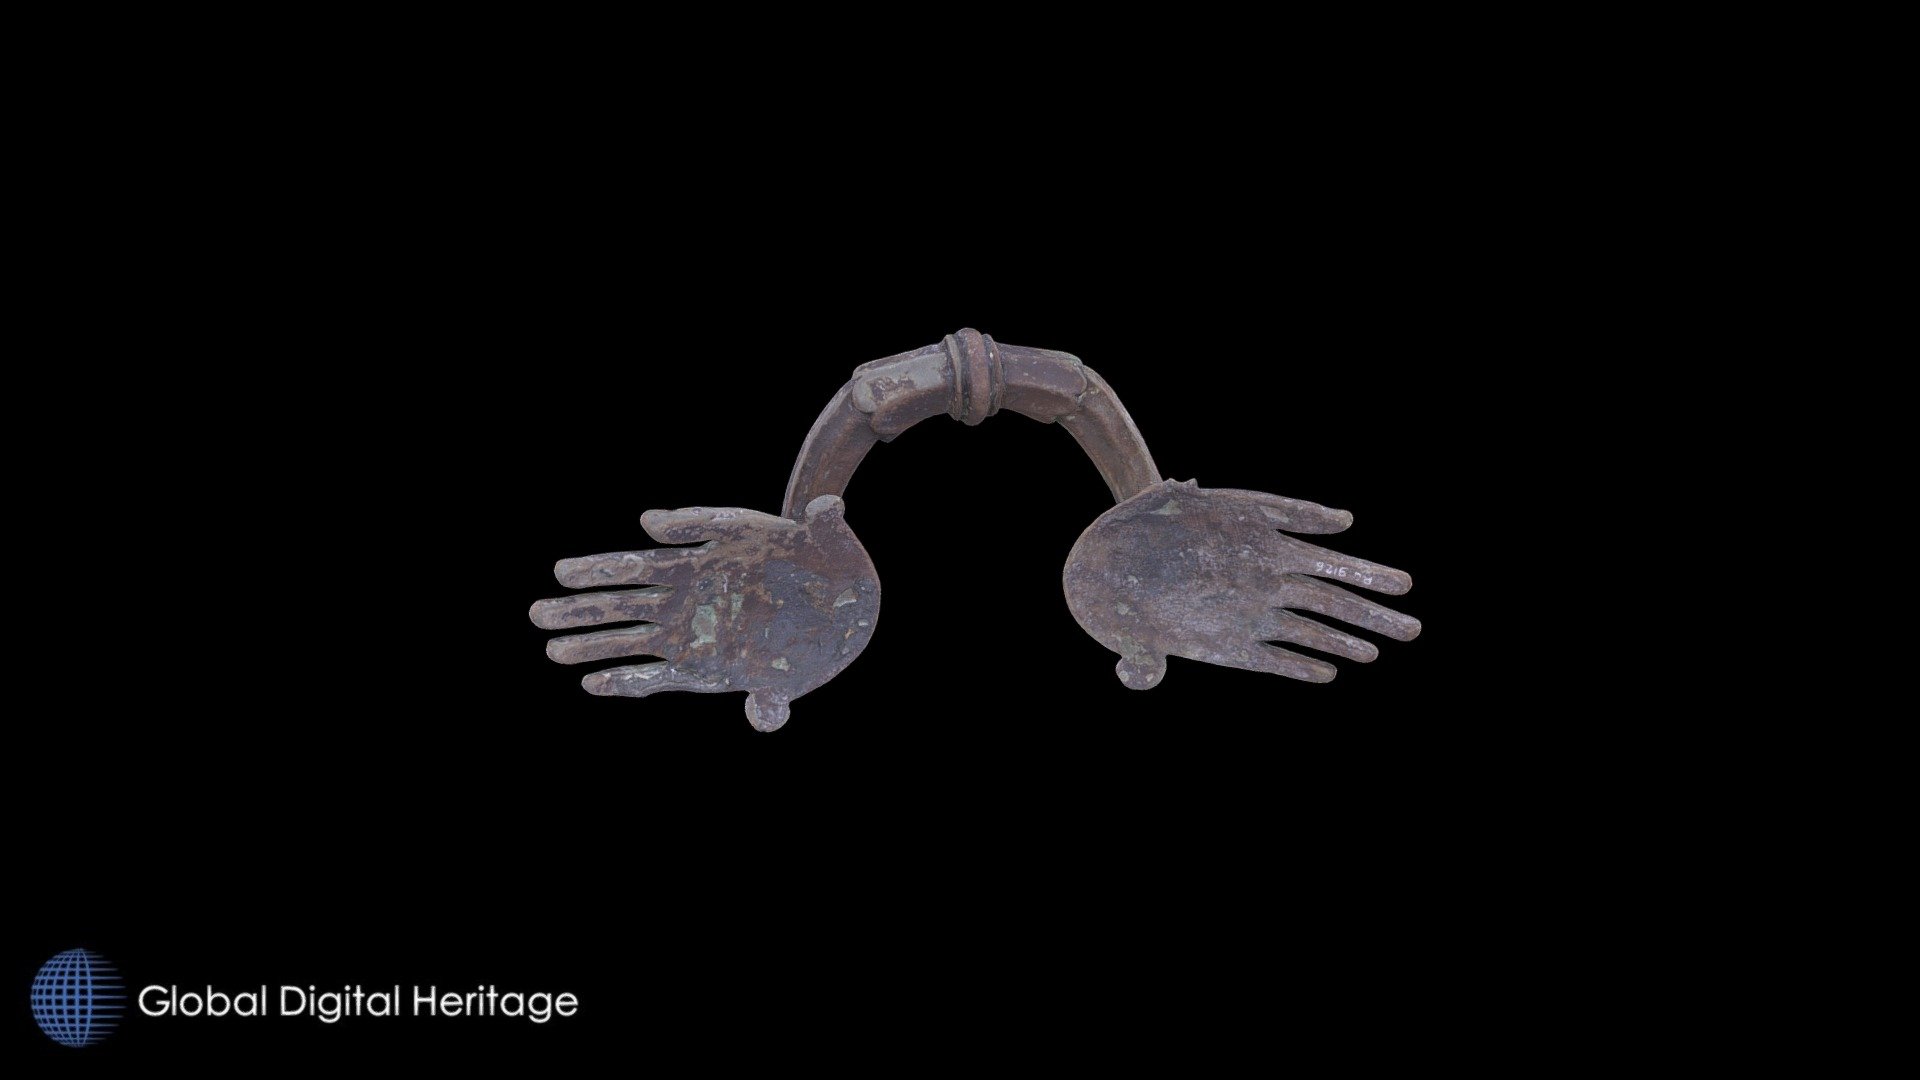 Movable handle. Handle with horizontal attacks in the shape of open hands with long and thin fingers, the wrists are decorated with a band with edges decorated with ribs ending in scrolls.  Campania-Pompeian production. Camarina, Ragusa,  Sicily, Italy.  Roman Age.  1st century AD.  Museo Archeologico Ibleo di Ragusa.  279 images. GDH ID and Catalog No. RG9126 

Citation:  Di Stefano, G., Sammito, A. &amp; Scerra, S. (2008): ““Tesori camarinesi” … in fondo al mare della storia”, in Thesaurus Hyblaeus: 14-27. 

We acknowledge the collaboration of the &ldquo;Soprintendenza per i Beni Culturali ed Ambientali di Ragusa